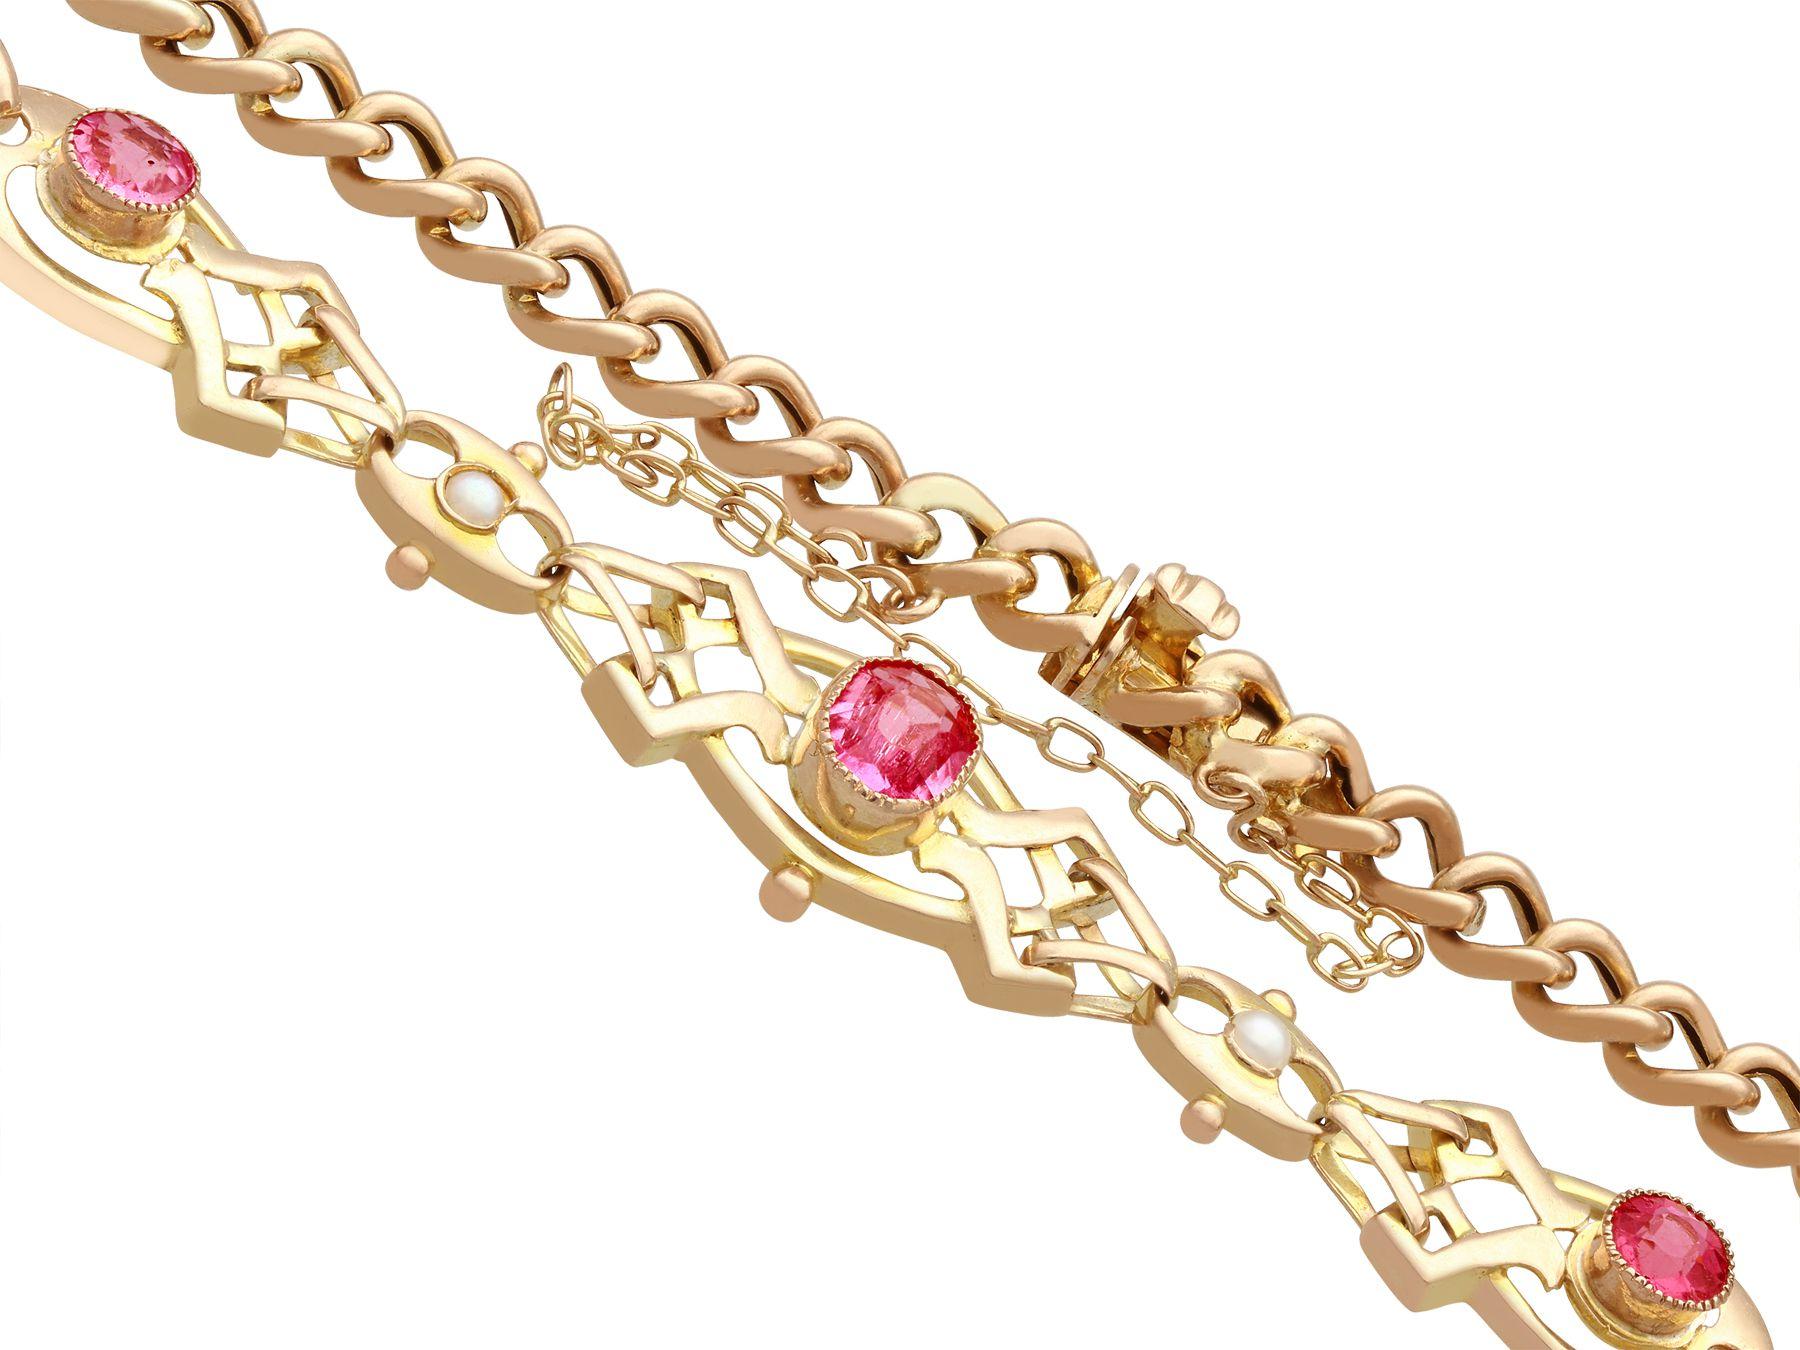 Oval Cut 1910s Antique 1.20 Carat Pink Tourmaline and Seed Pearl Yellow Gold Bracelet